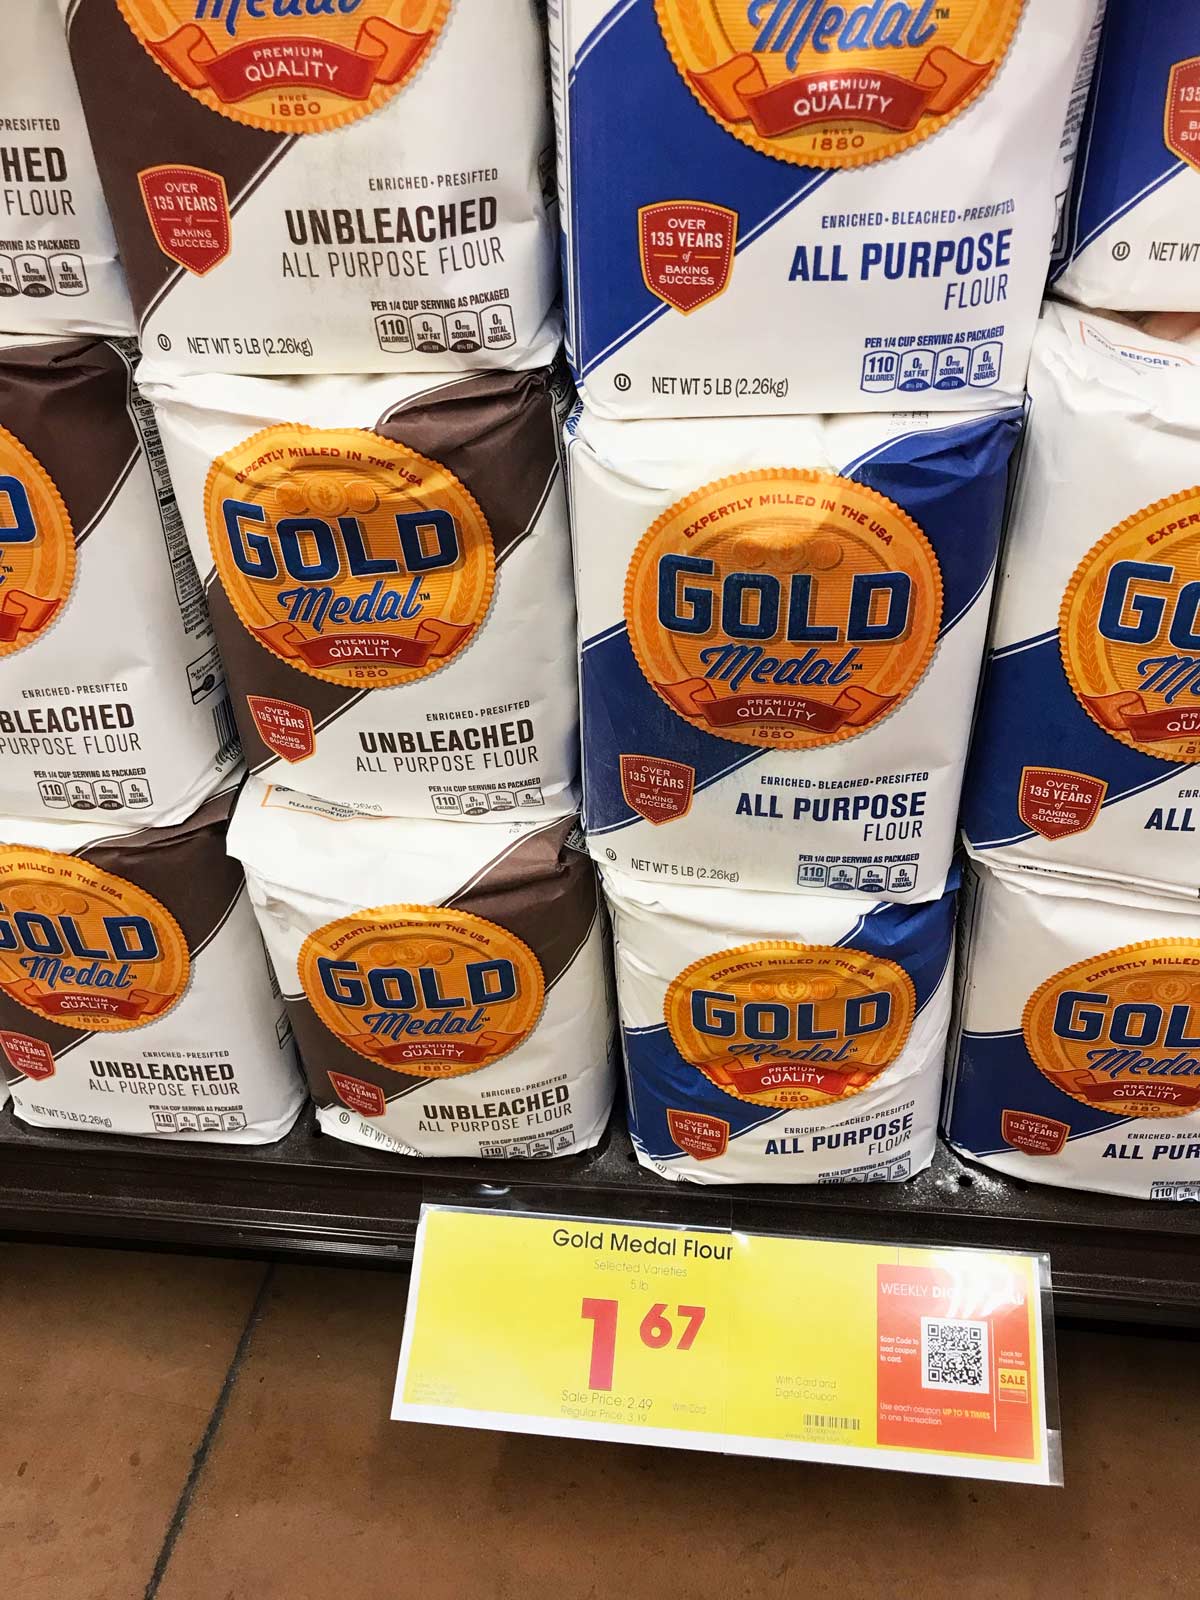 sale display of flour bags for $1.67 at the grocery store.